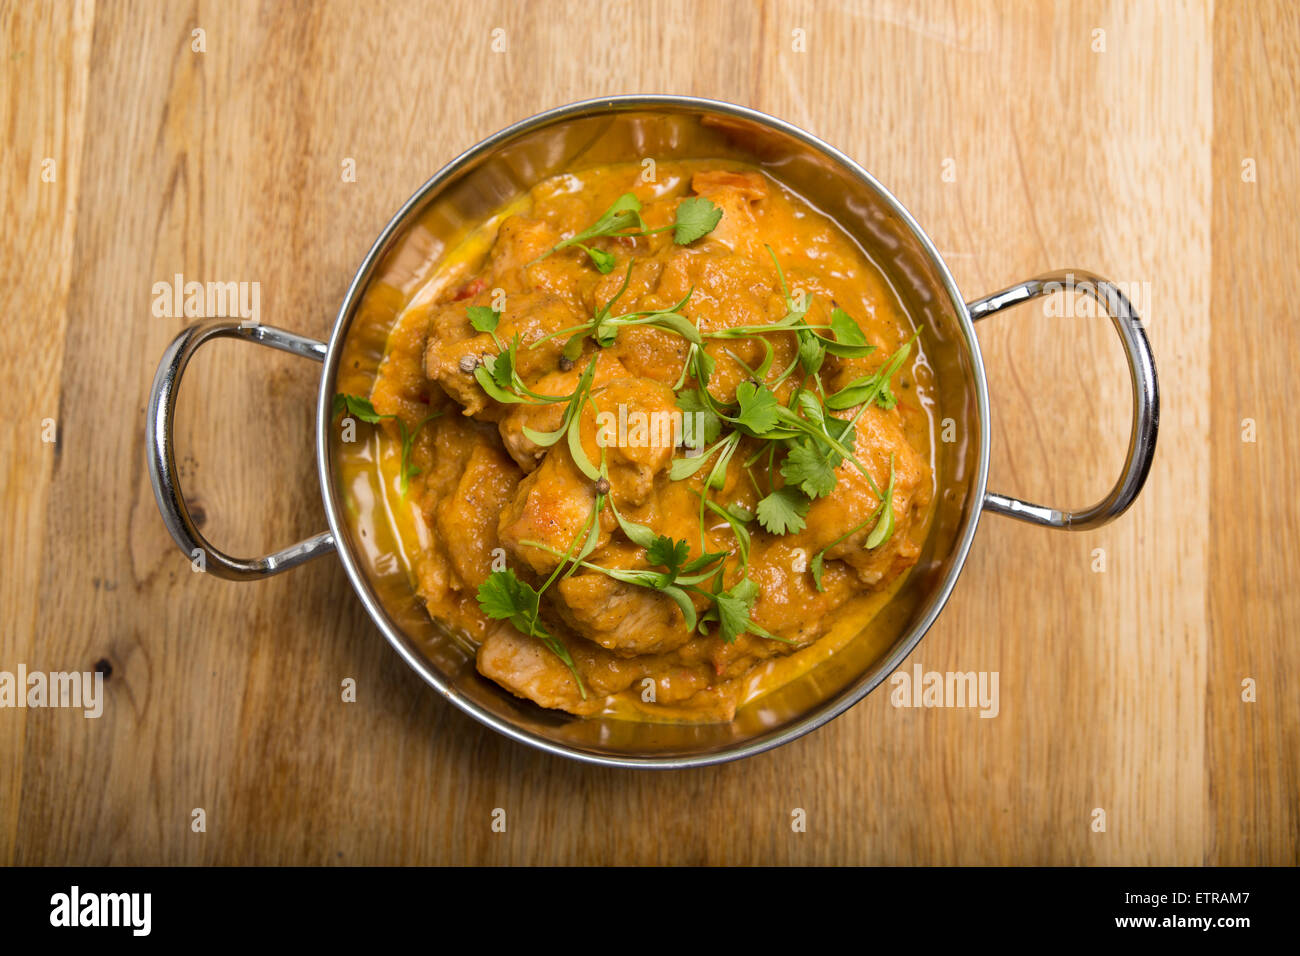 A metal balti bowl with chicken curry Stock Photo - Alamy